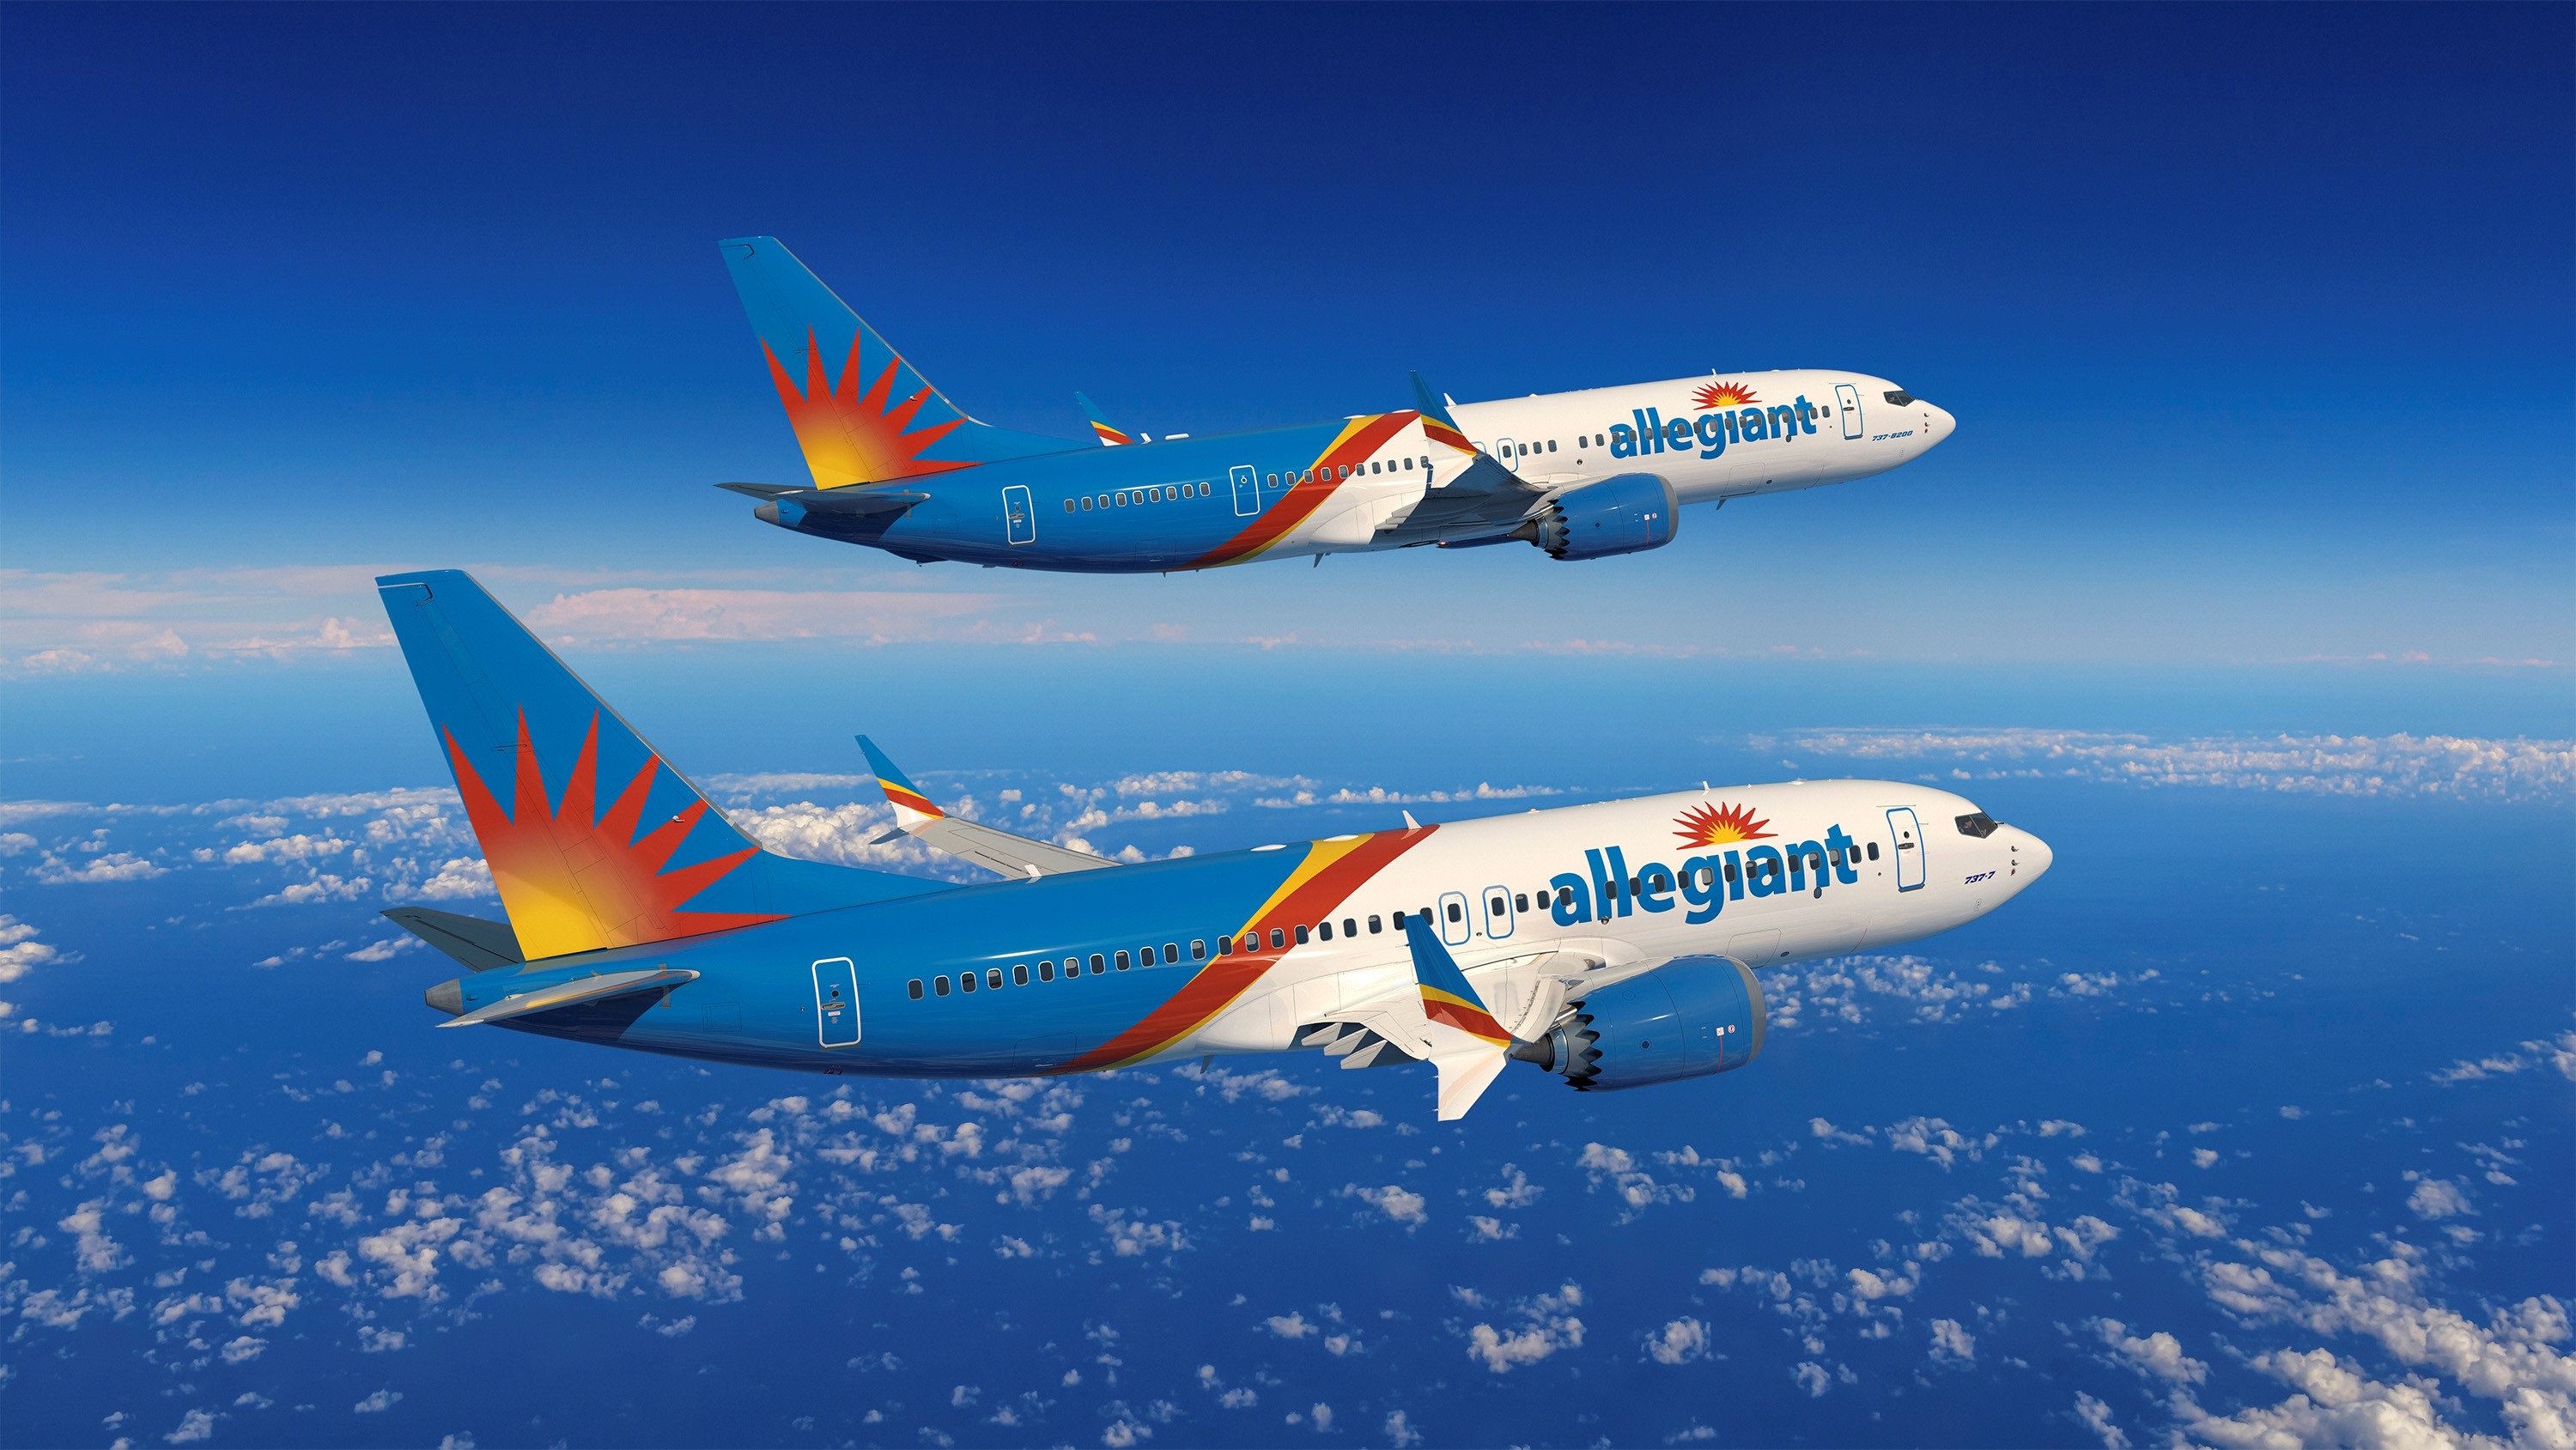 Allegiant  Air  returns  back  to  Boeing ,  as  it  orders  50  B737 MAX  aircraft , with  an  options  for  another  50  airplanes  for  the  future !